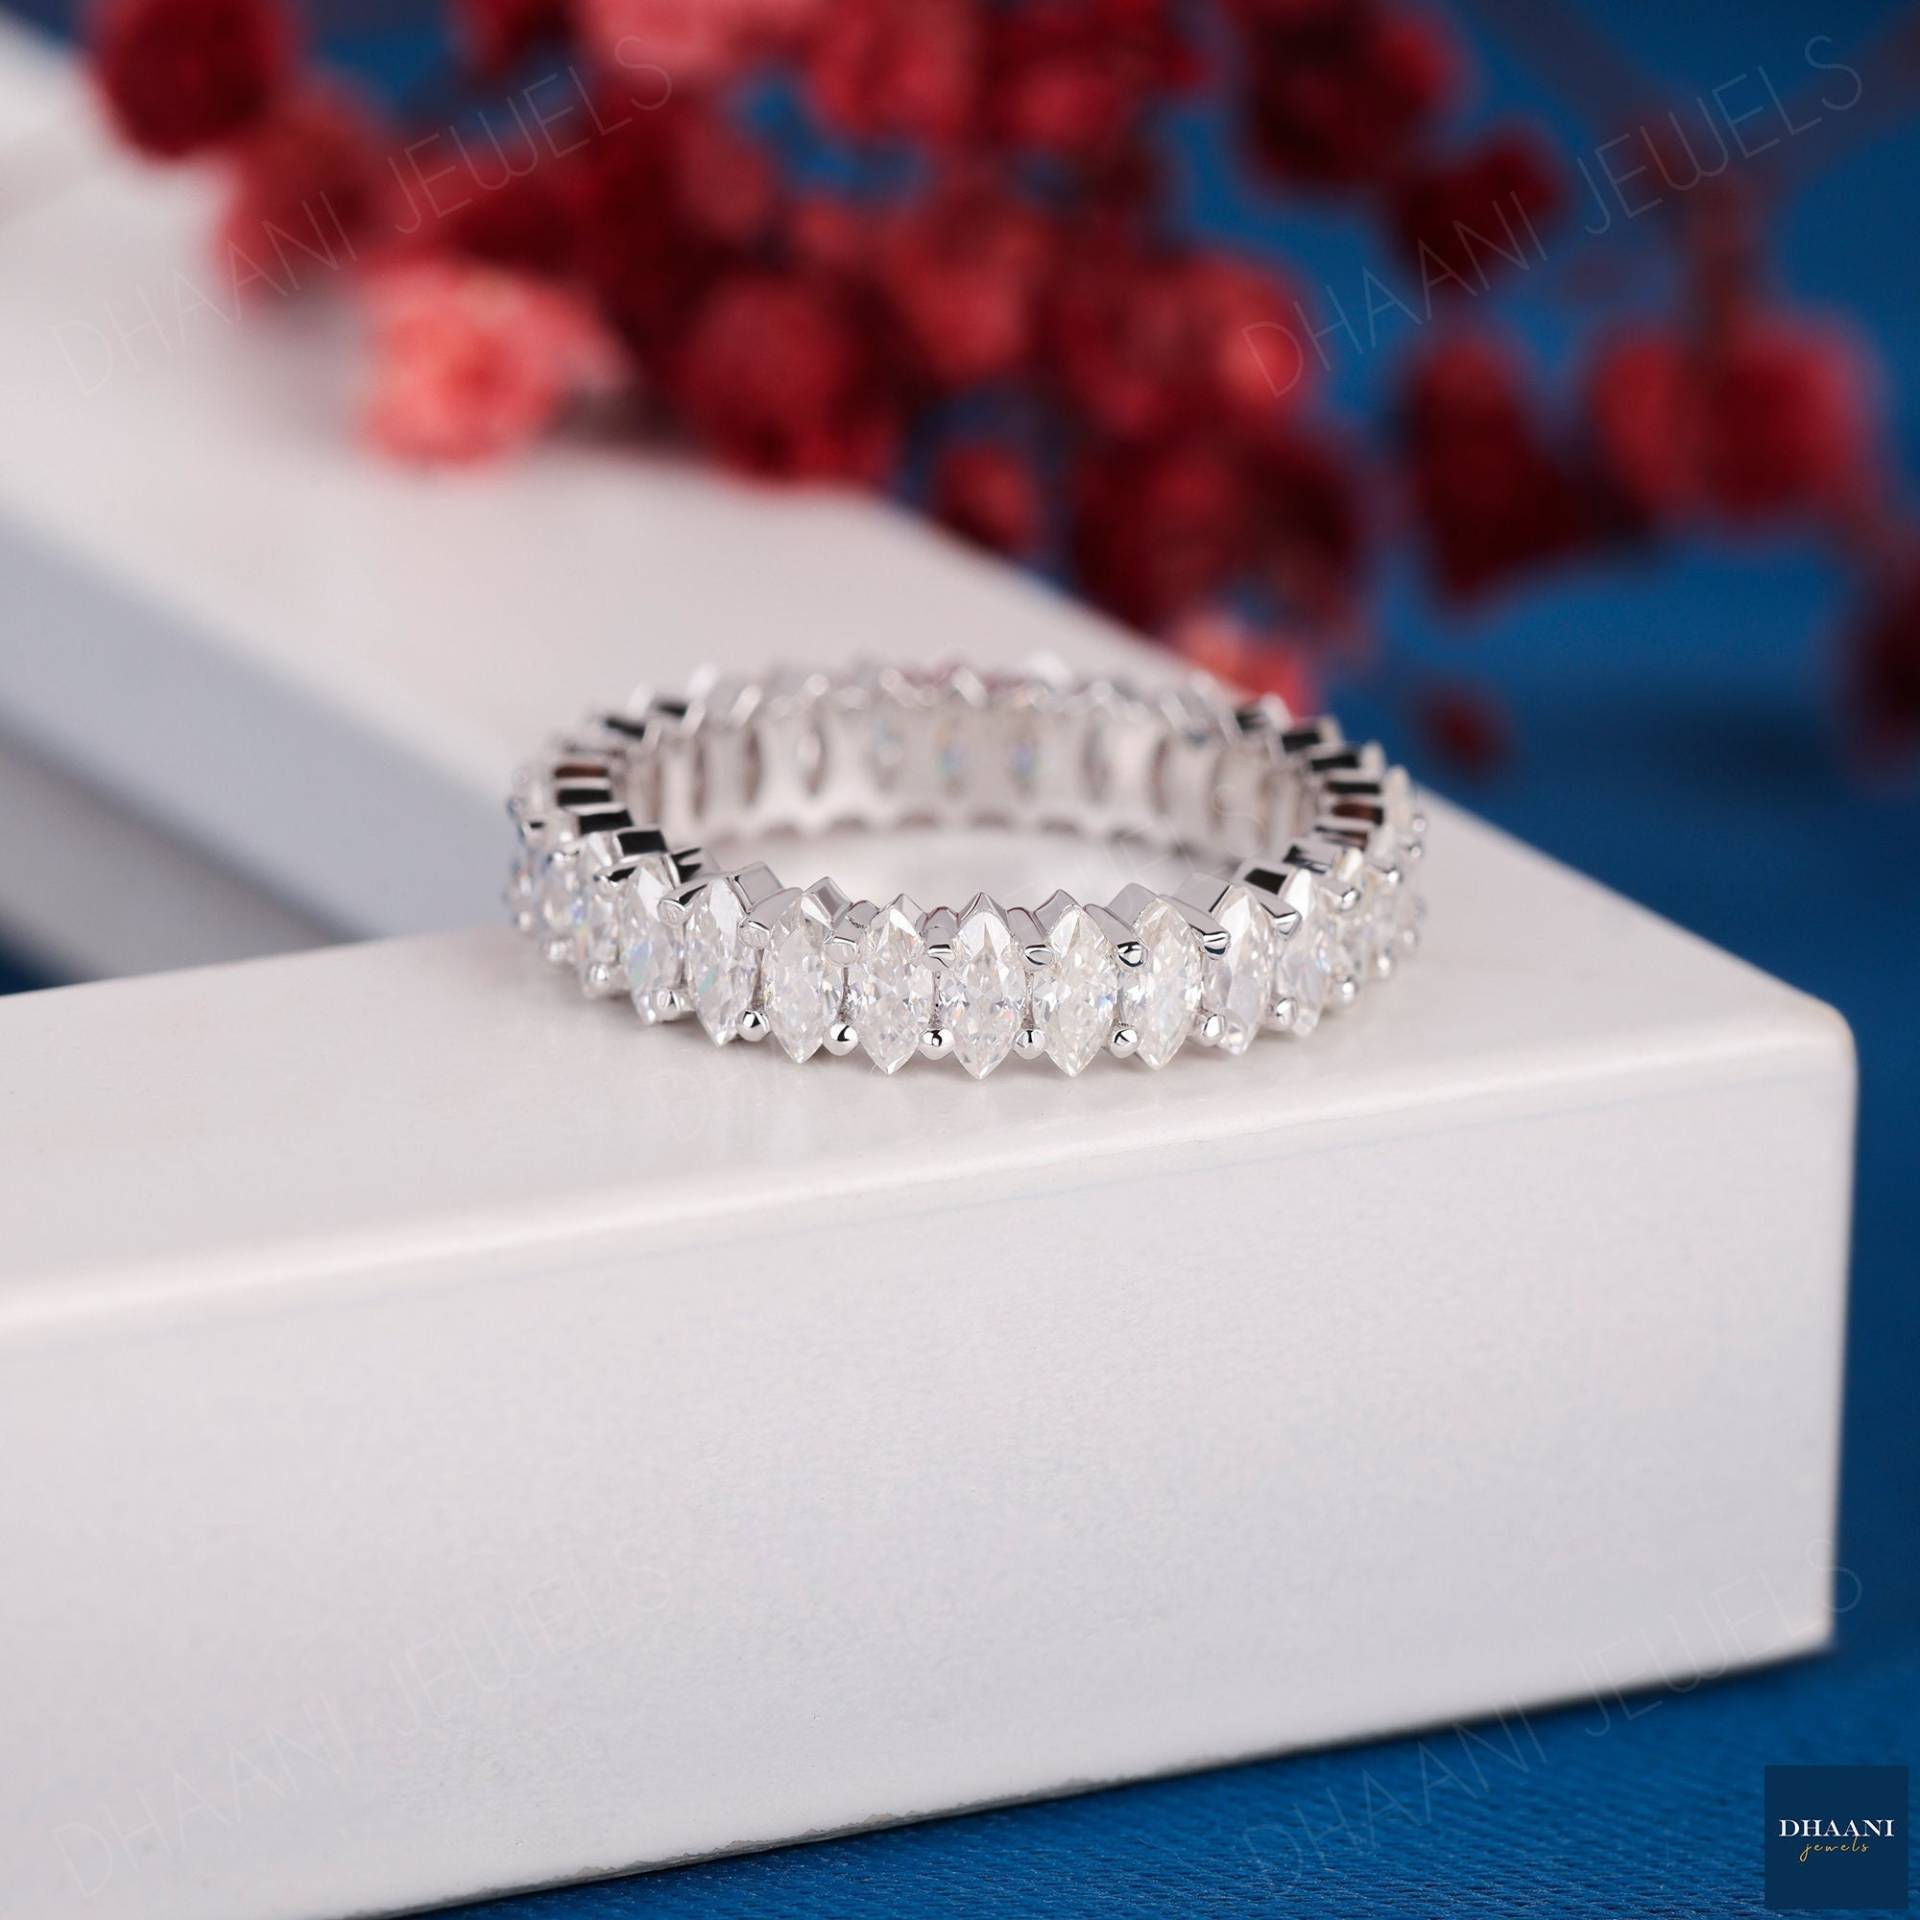 Moissanit Ehering, Marquise Cut Full Eternity Band, Diamant Stapelring, 14K Weißgold Passendes Modernes Brautband, Dünnes Band von DhaaniJewels